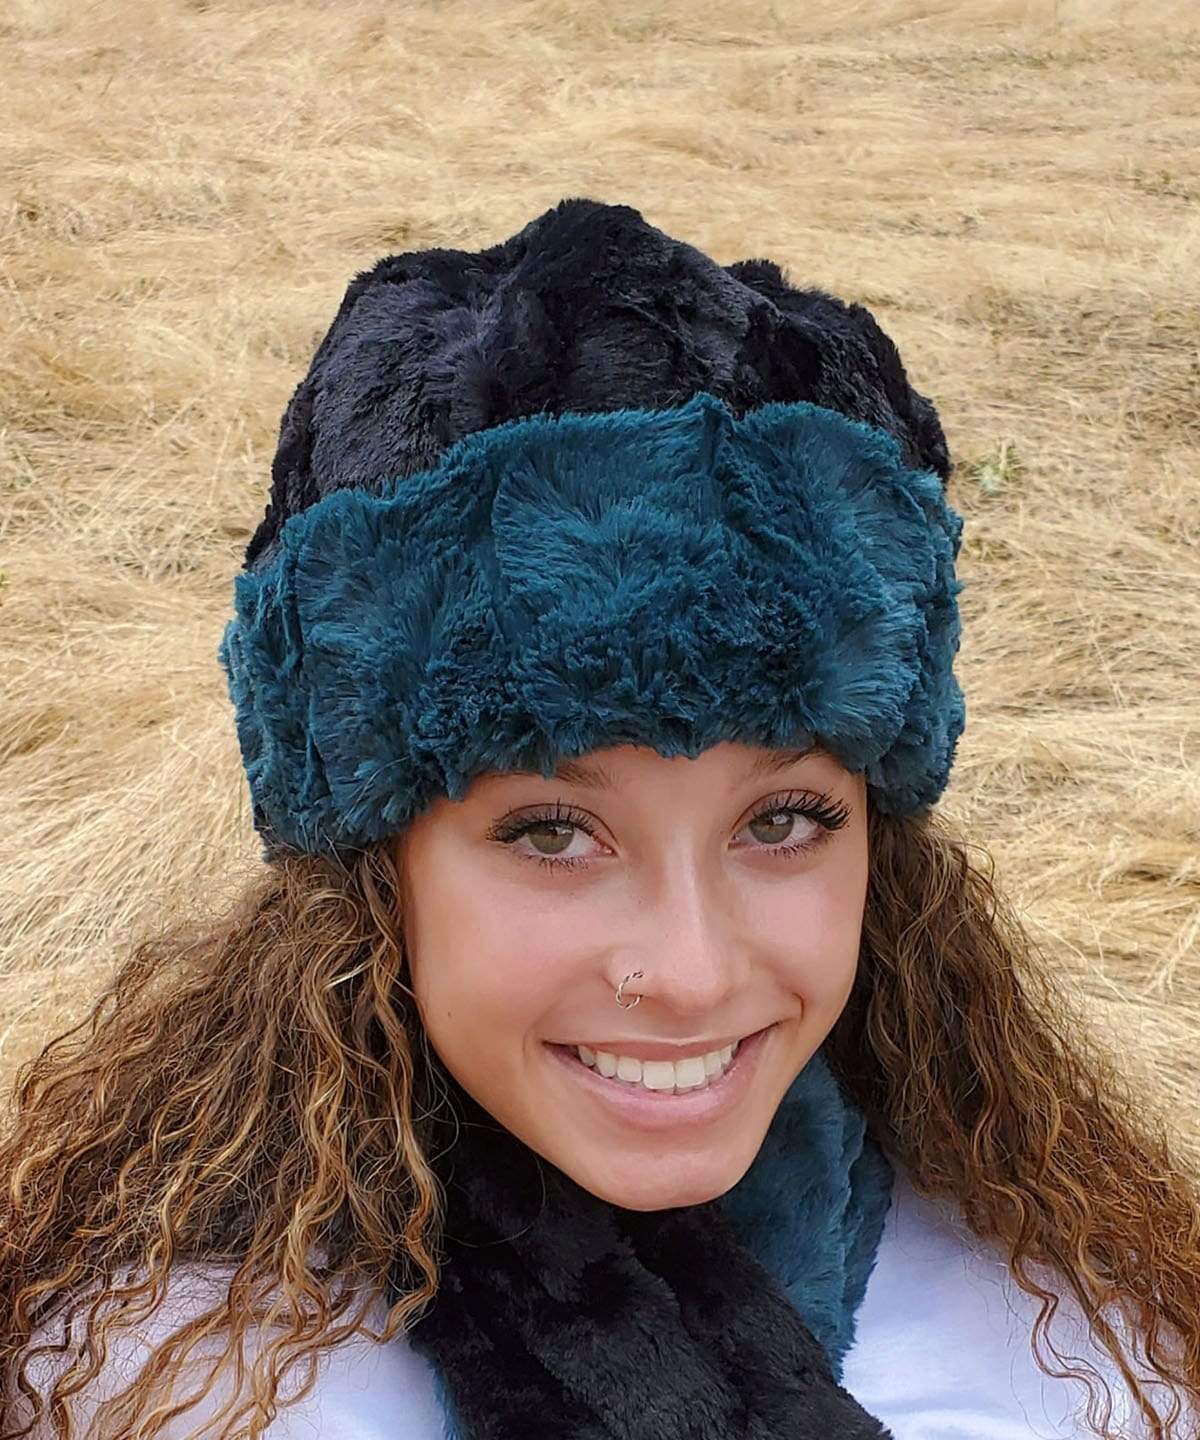 Woman modeling Beanie Hat, reversible - Luxury Faux Fur in Peacock Pond lined in Cuddly Black. By Pandemonium Millinery